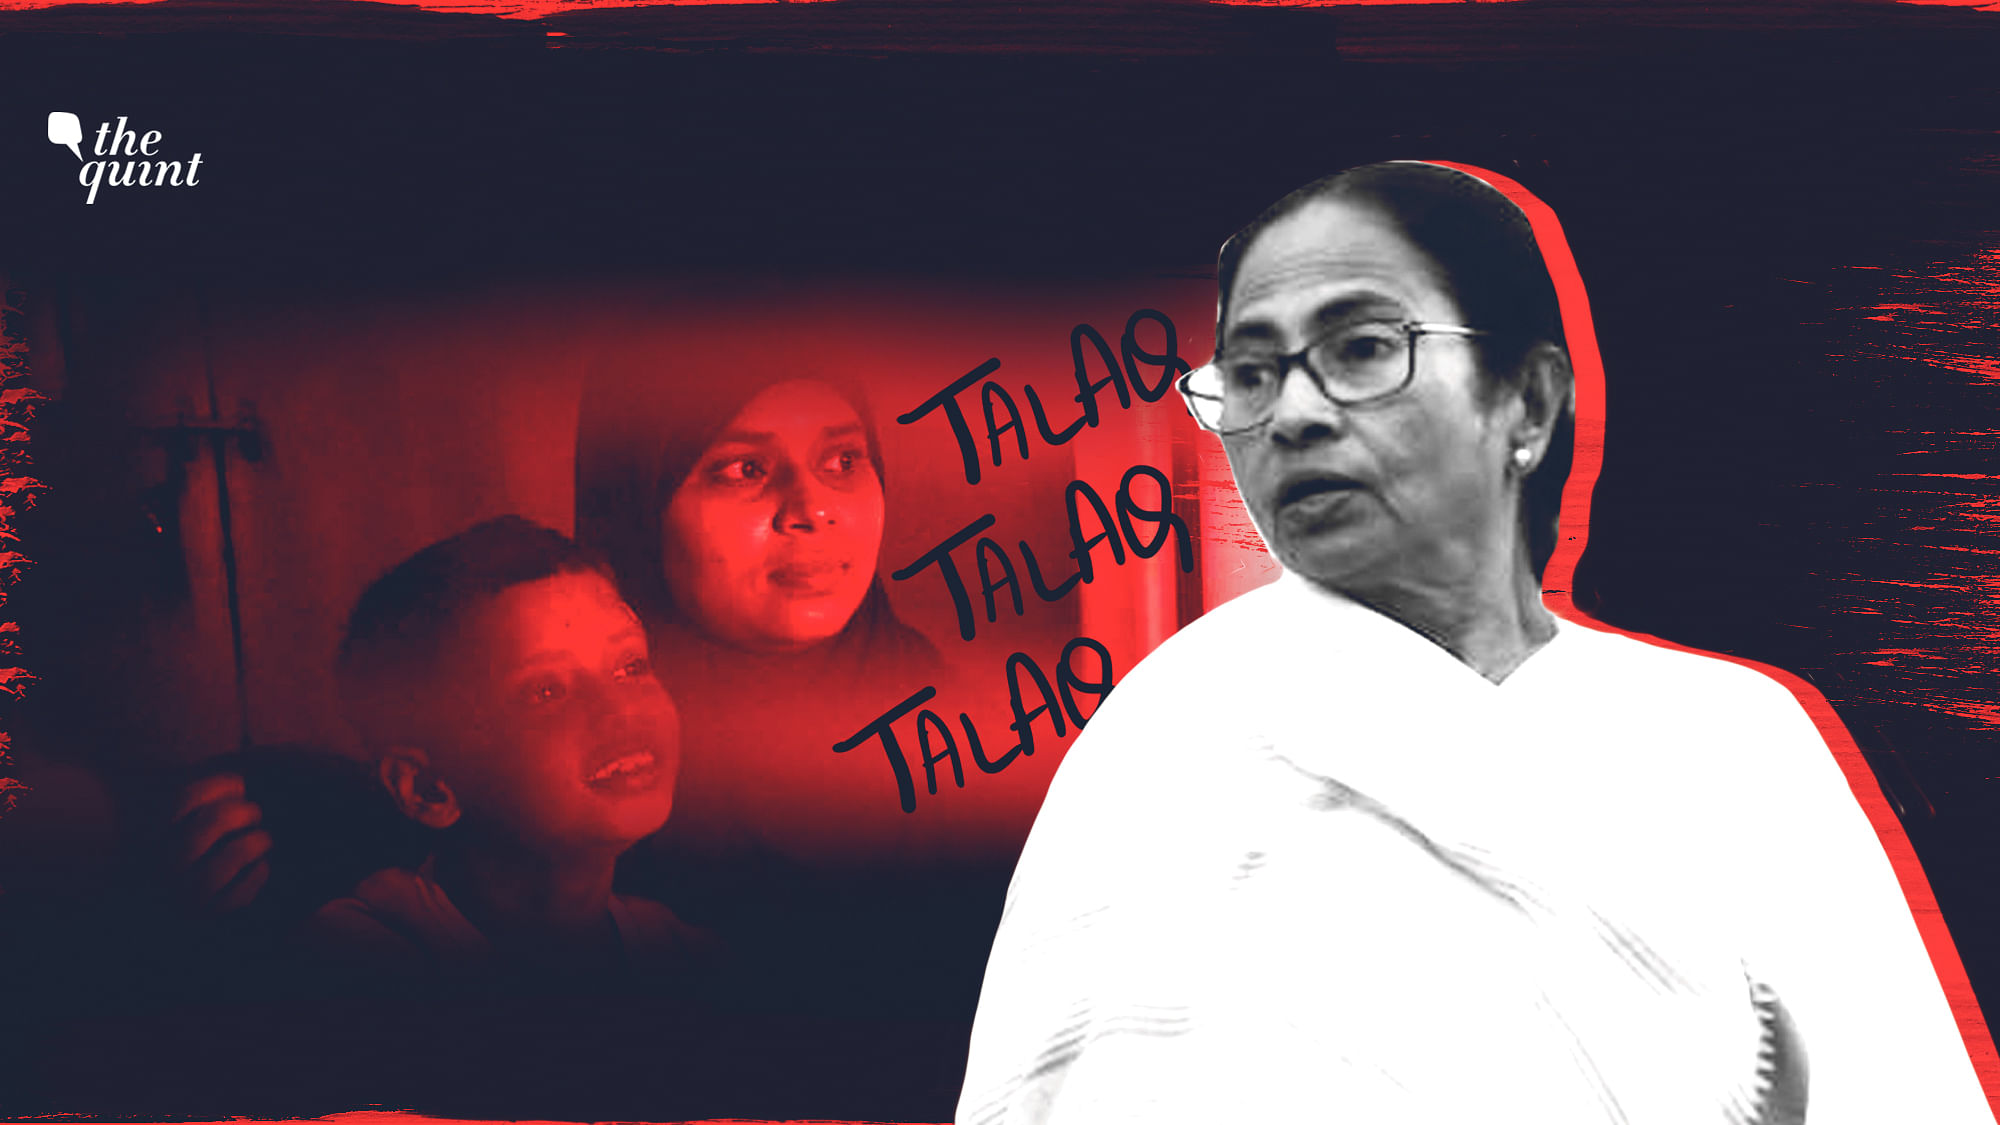 Triple talaq petitioner and BJP leader Ishrat Jahan has faced backlash from her community for attending a Hindu religious event in a hijab. Something similar had happened to Trinamool MP Nusrat Jahan. Will Mamata Banerjee now stand in Ishrat’s support?